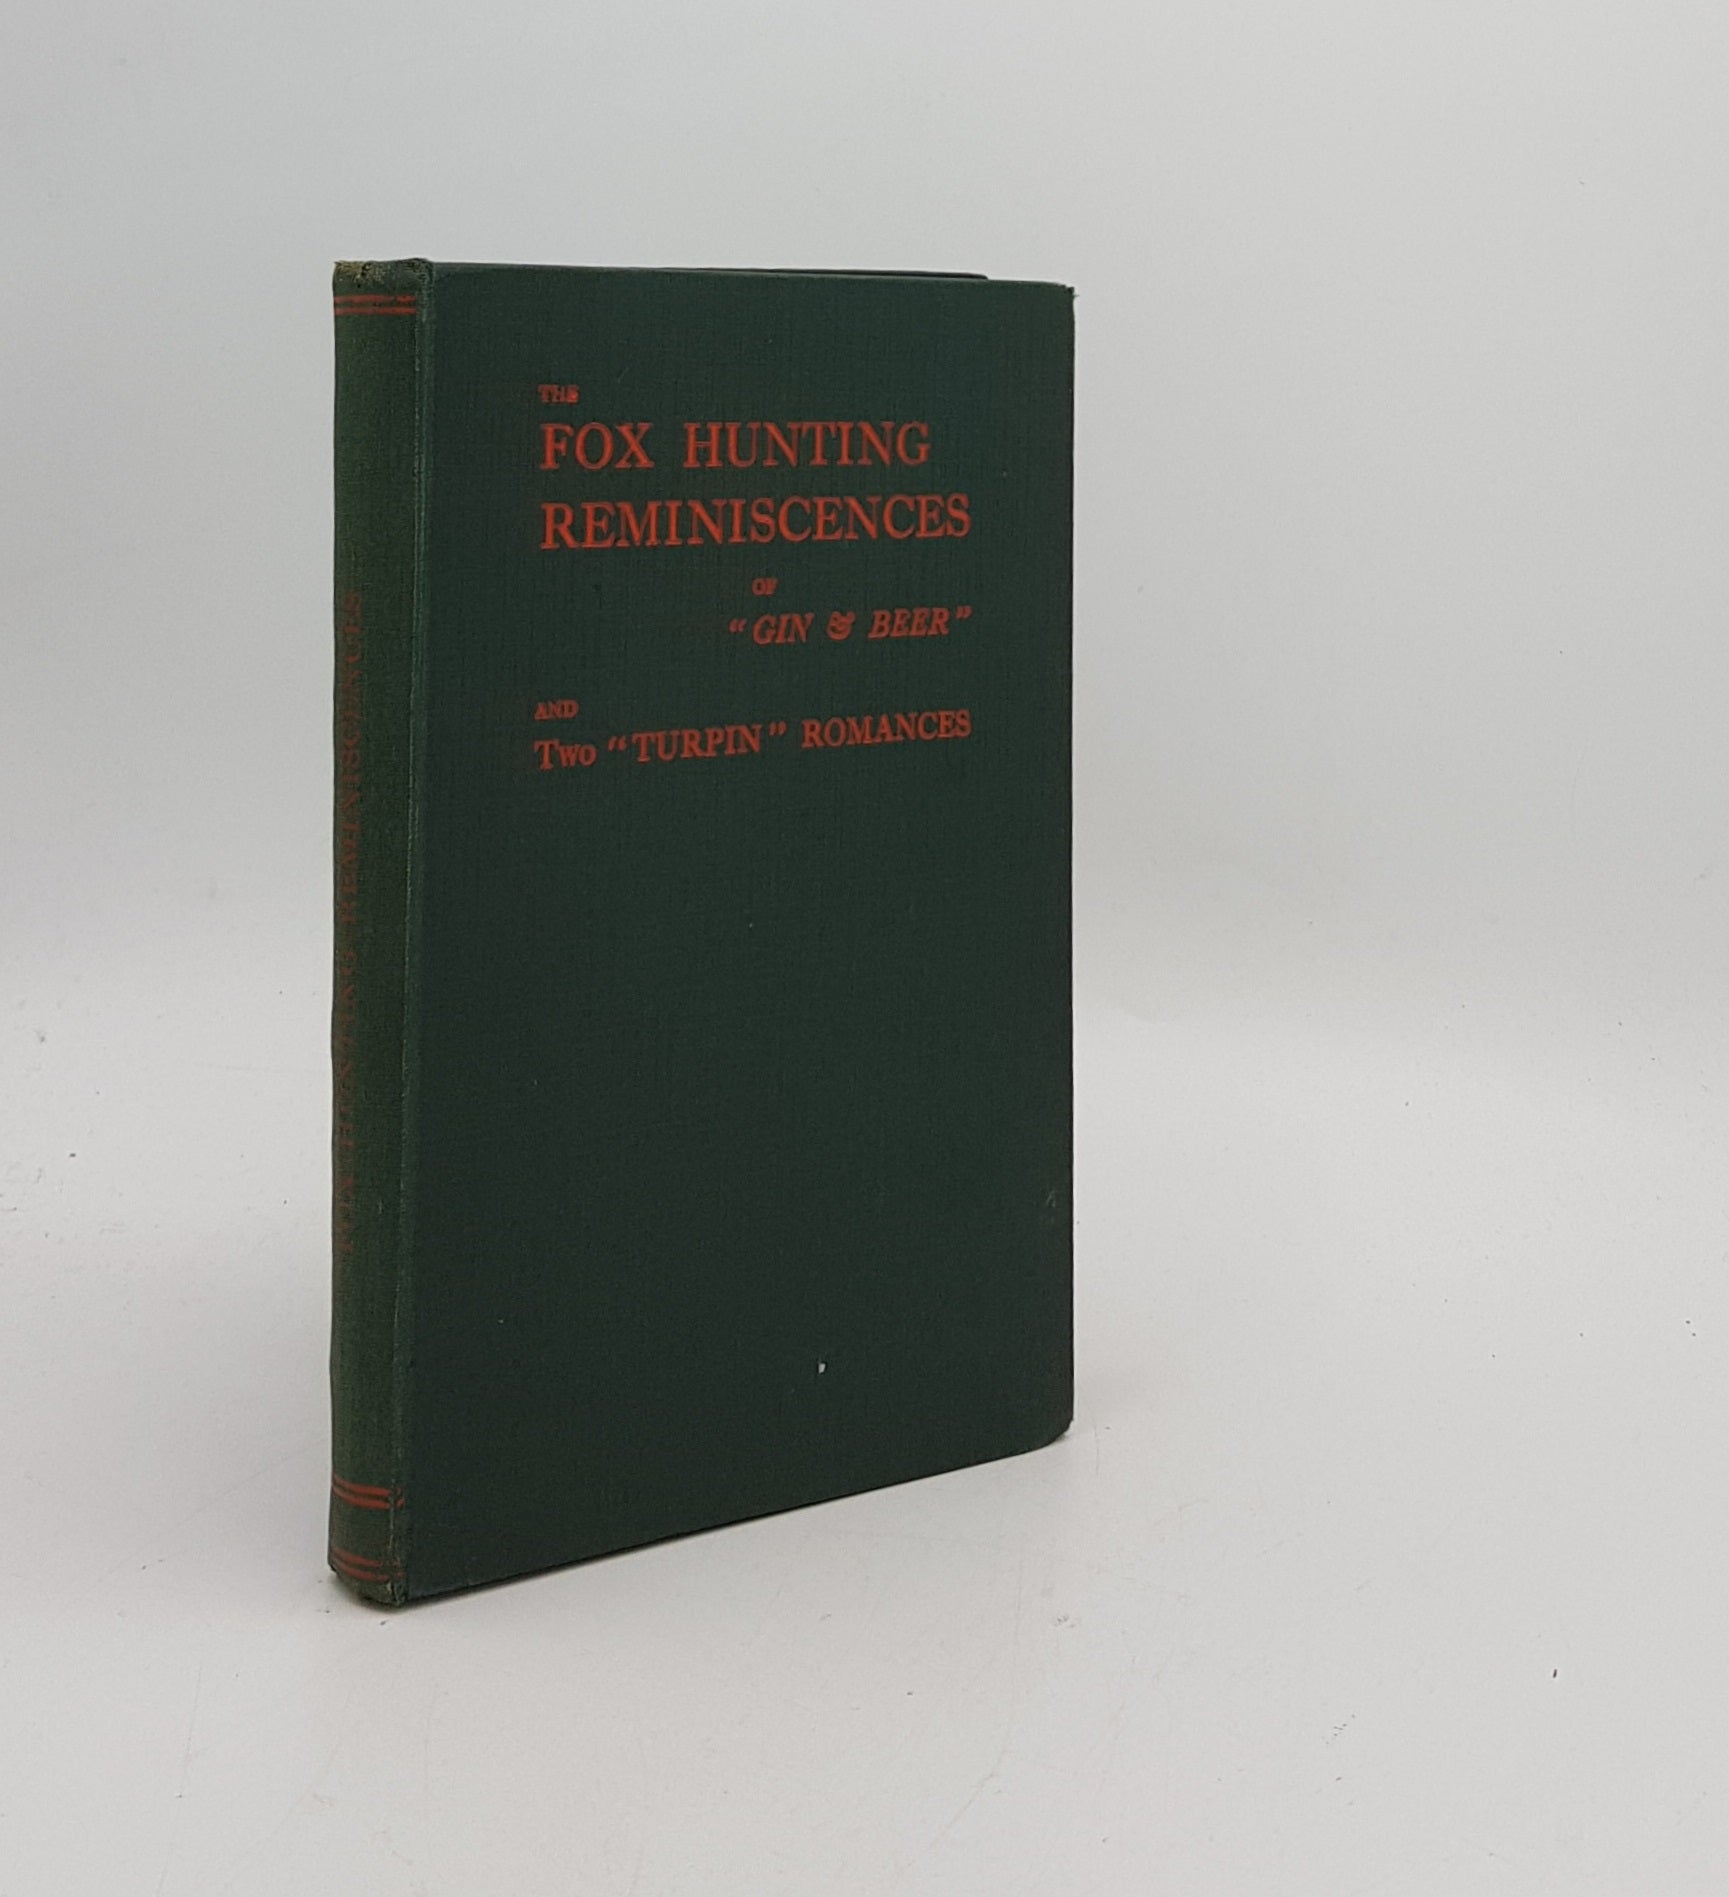 GIN & BEER - The Foxhunting Reminiscences of 'Gin & Beer' and Two Turpin Romances of Local Interest.